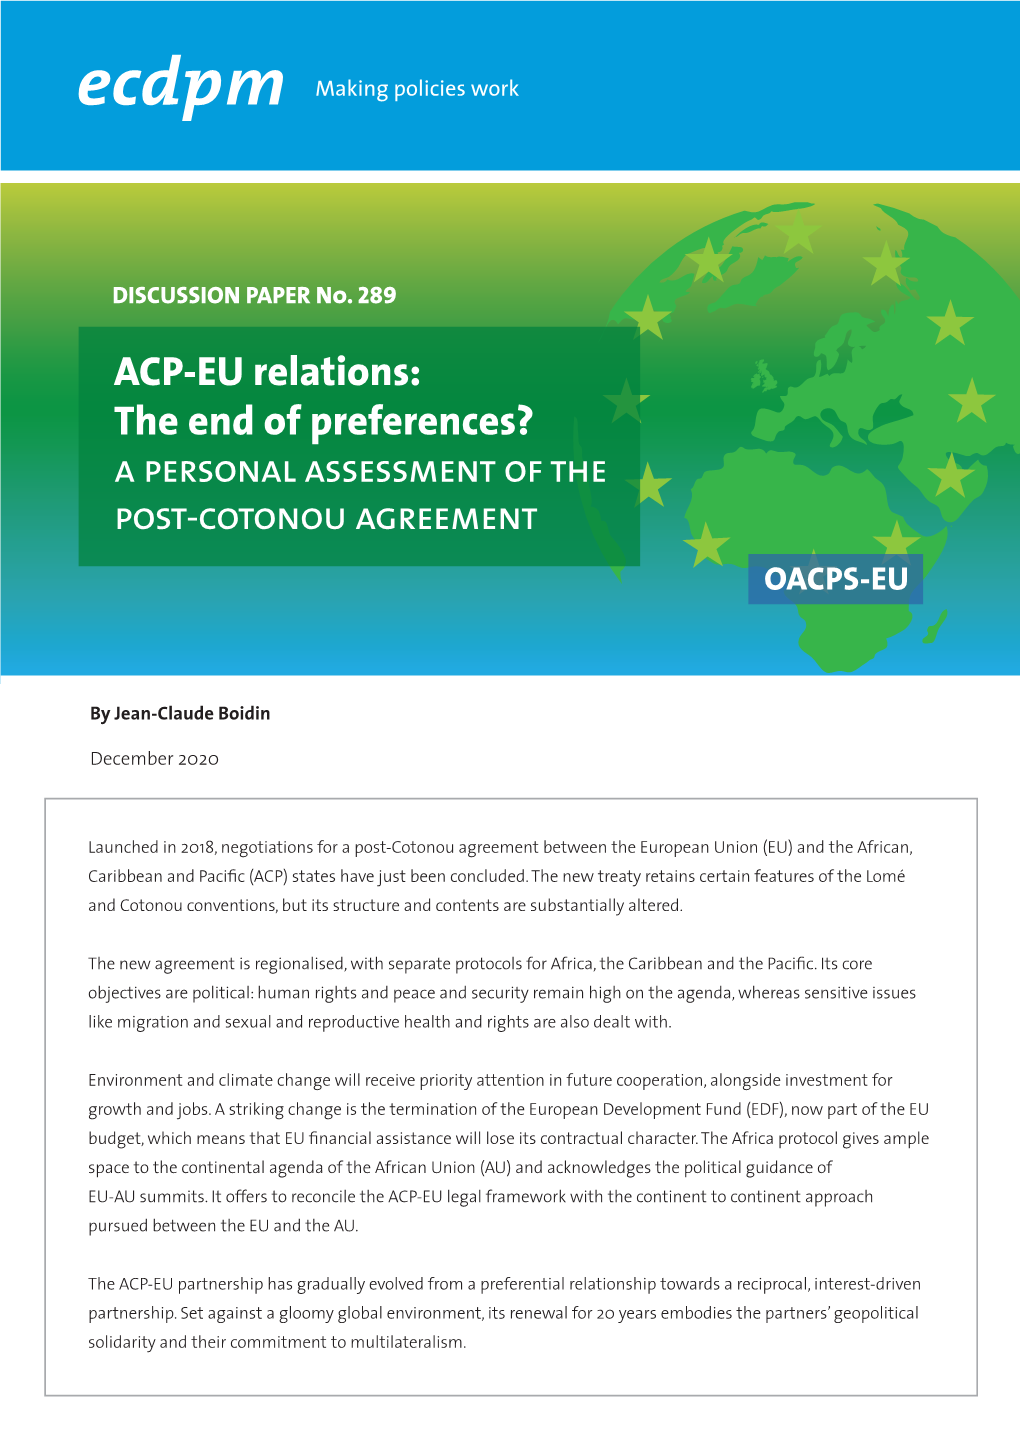 ACP-EU Relations: the End of Preferences? a Personal Assessment of the Post-Cotonou Agreement OACPS-EU